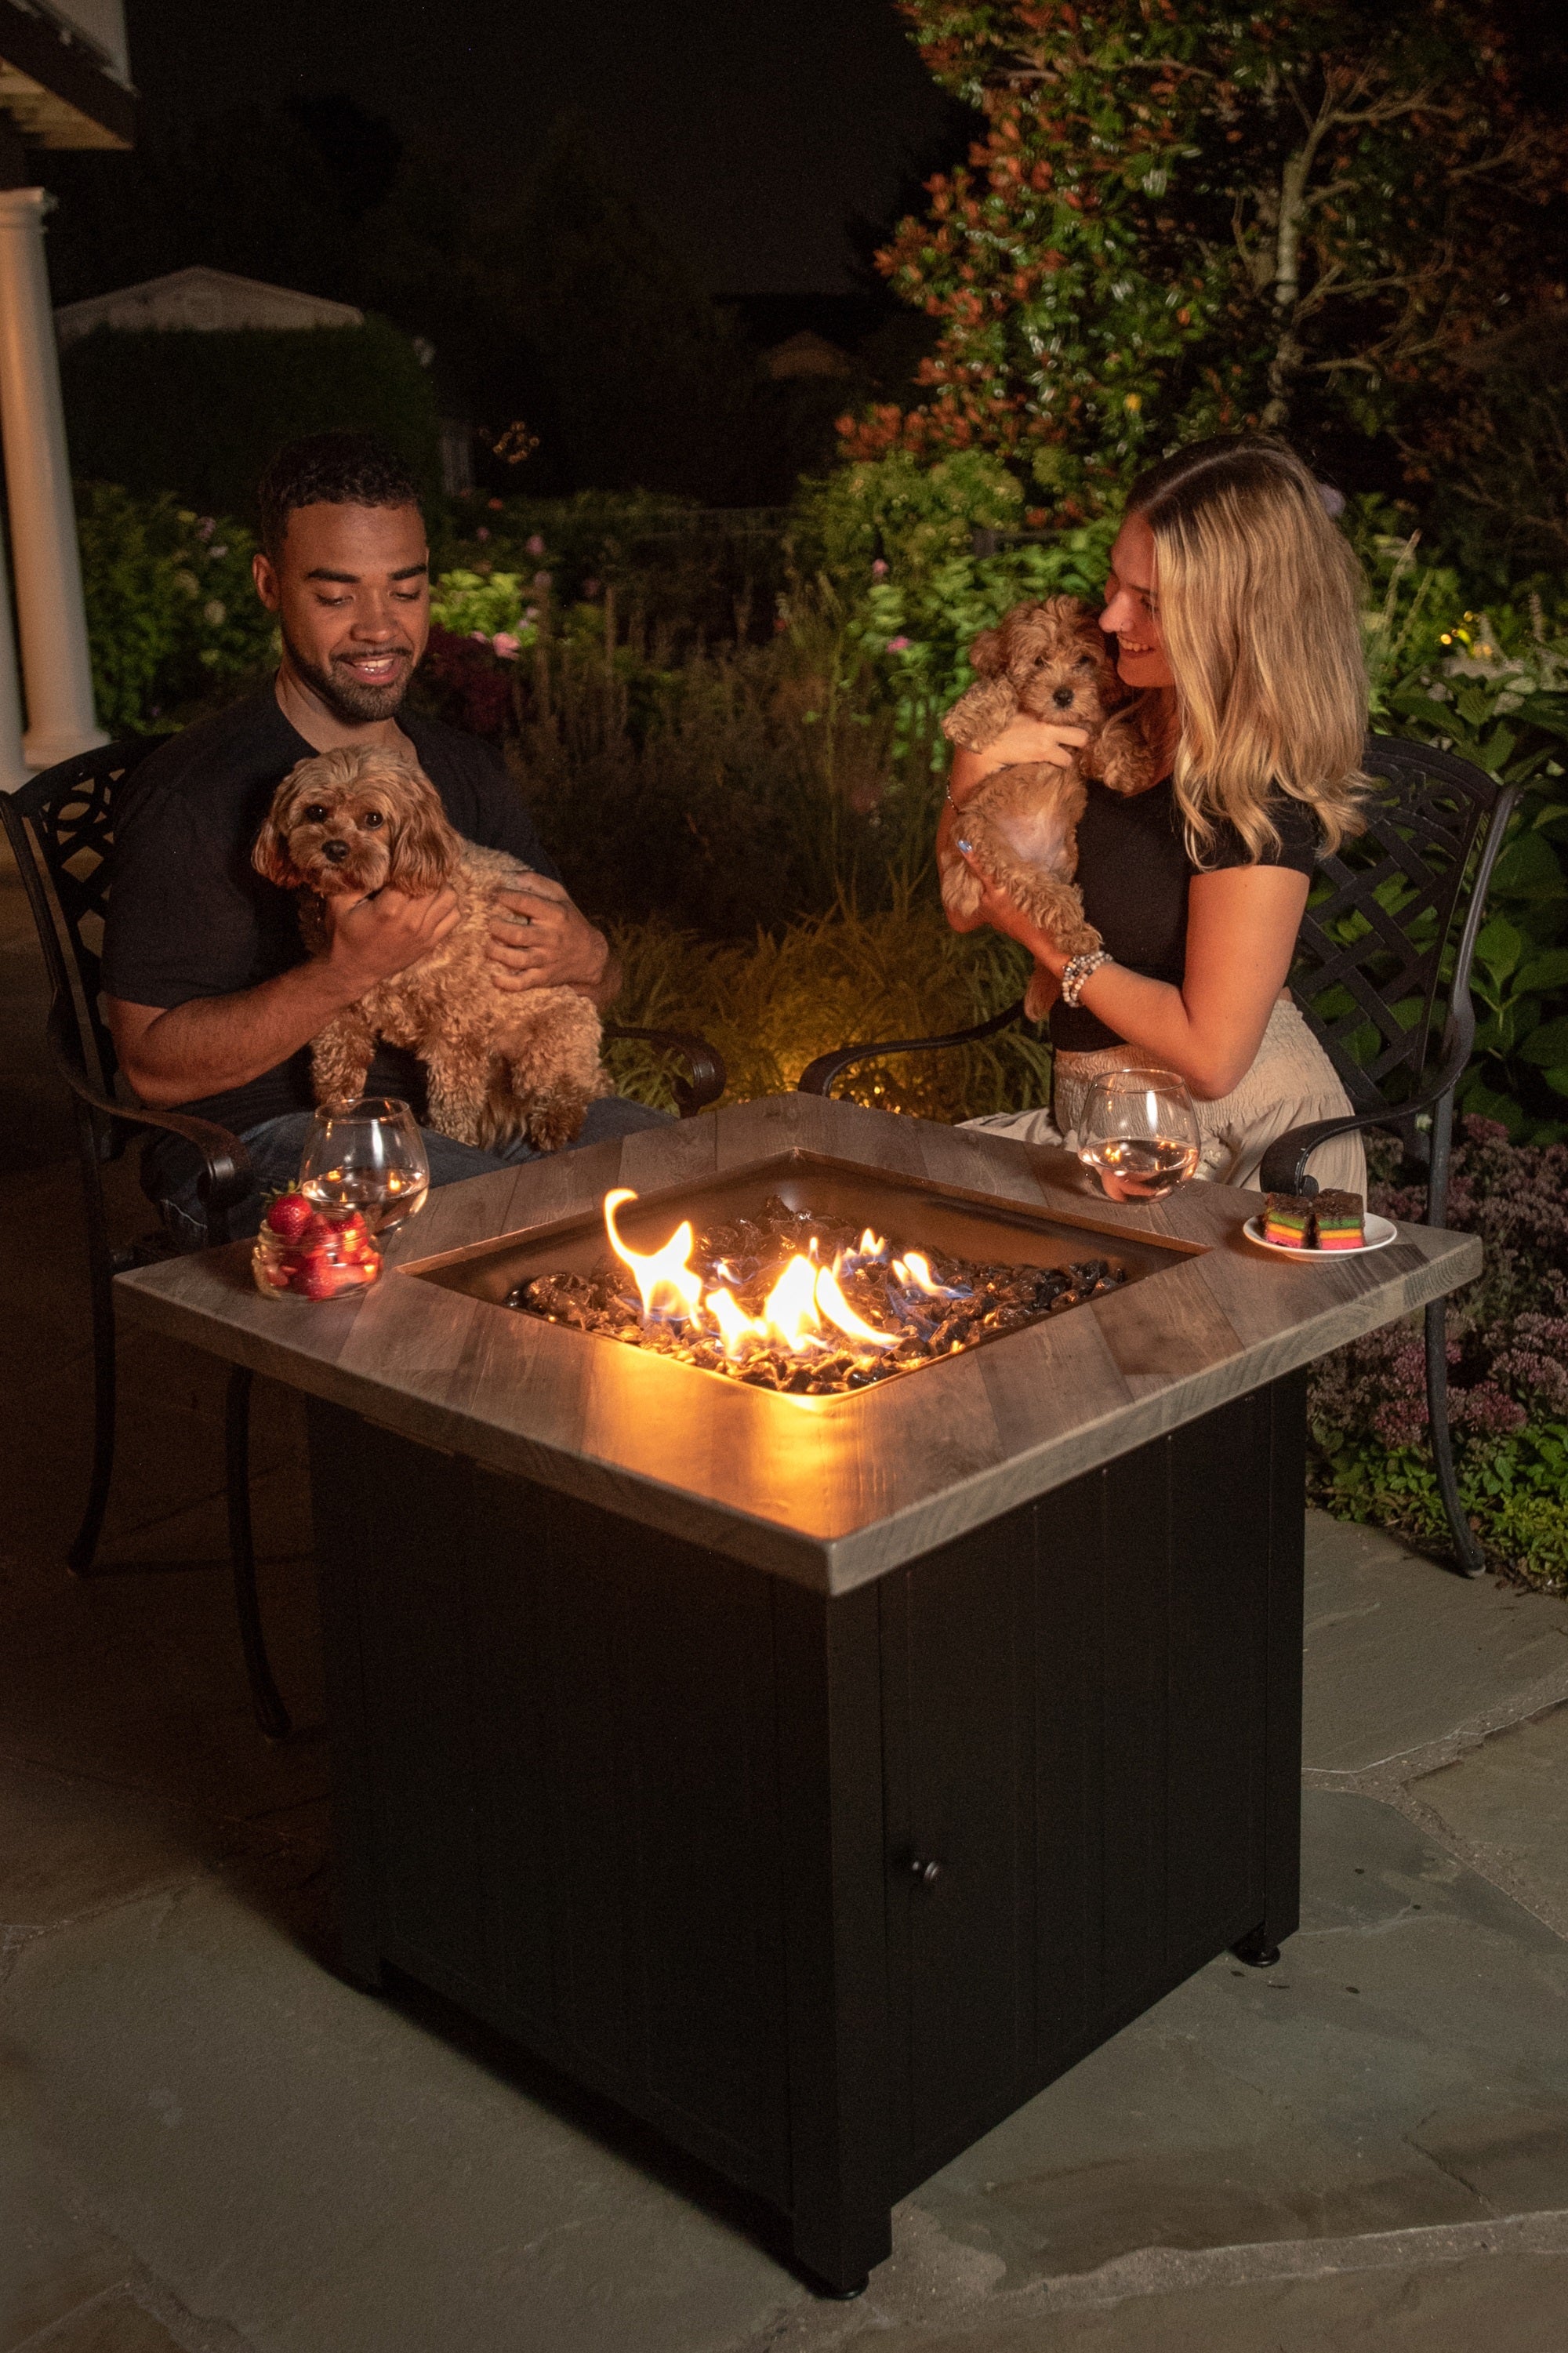 Endless Summer The Harper, 30" Square Gas Outdoor Fire Pit with Printed Cement Resin Mantel